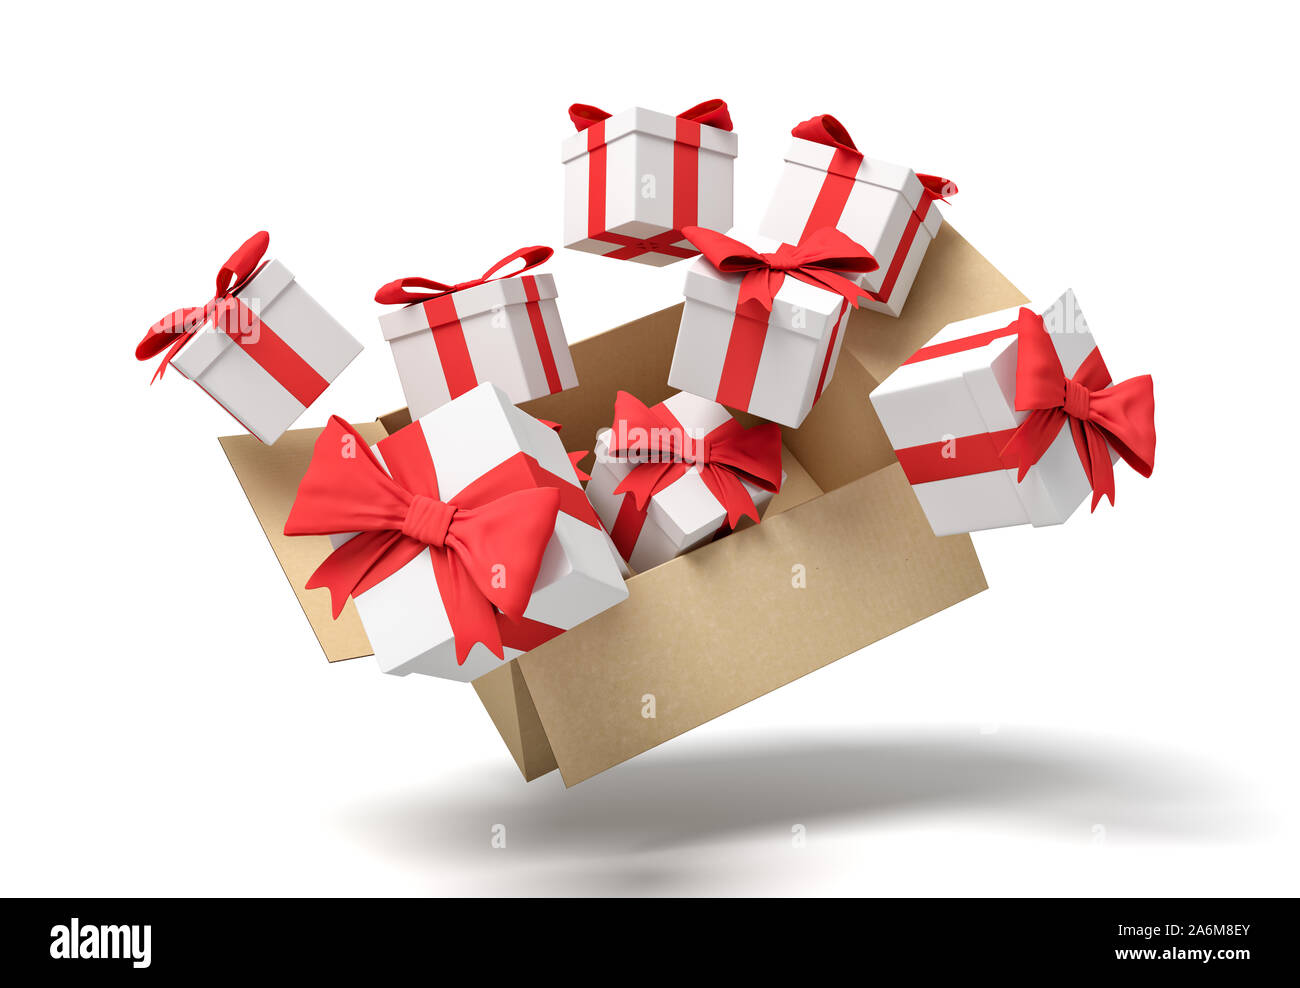 3d rendering of cardboard box flying in air full of gift boxes. Holiday season fuss. Choice of presents. Holiday specials. Stock Photo